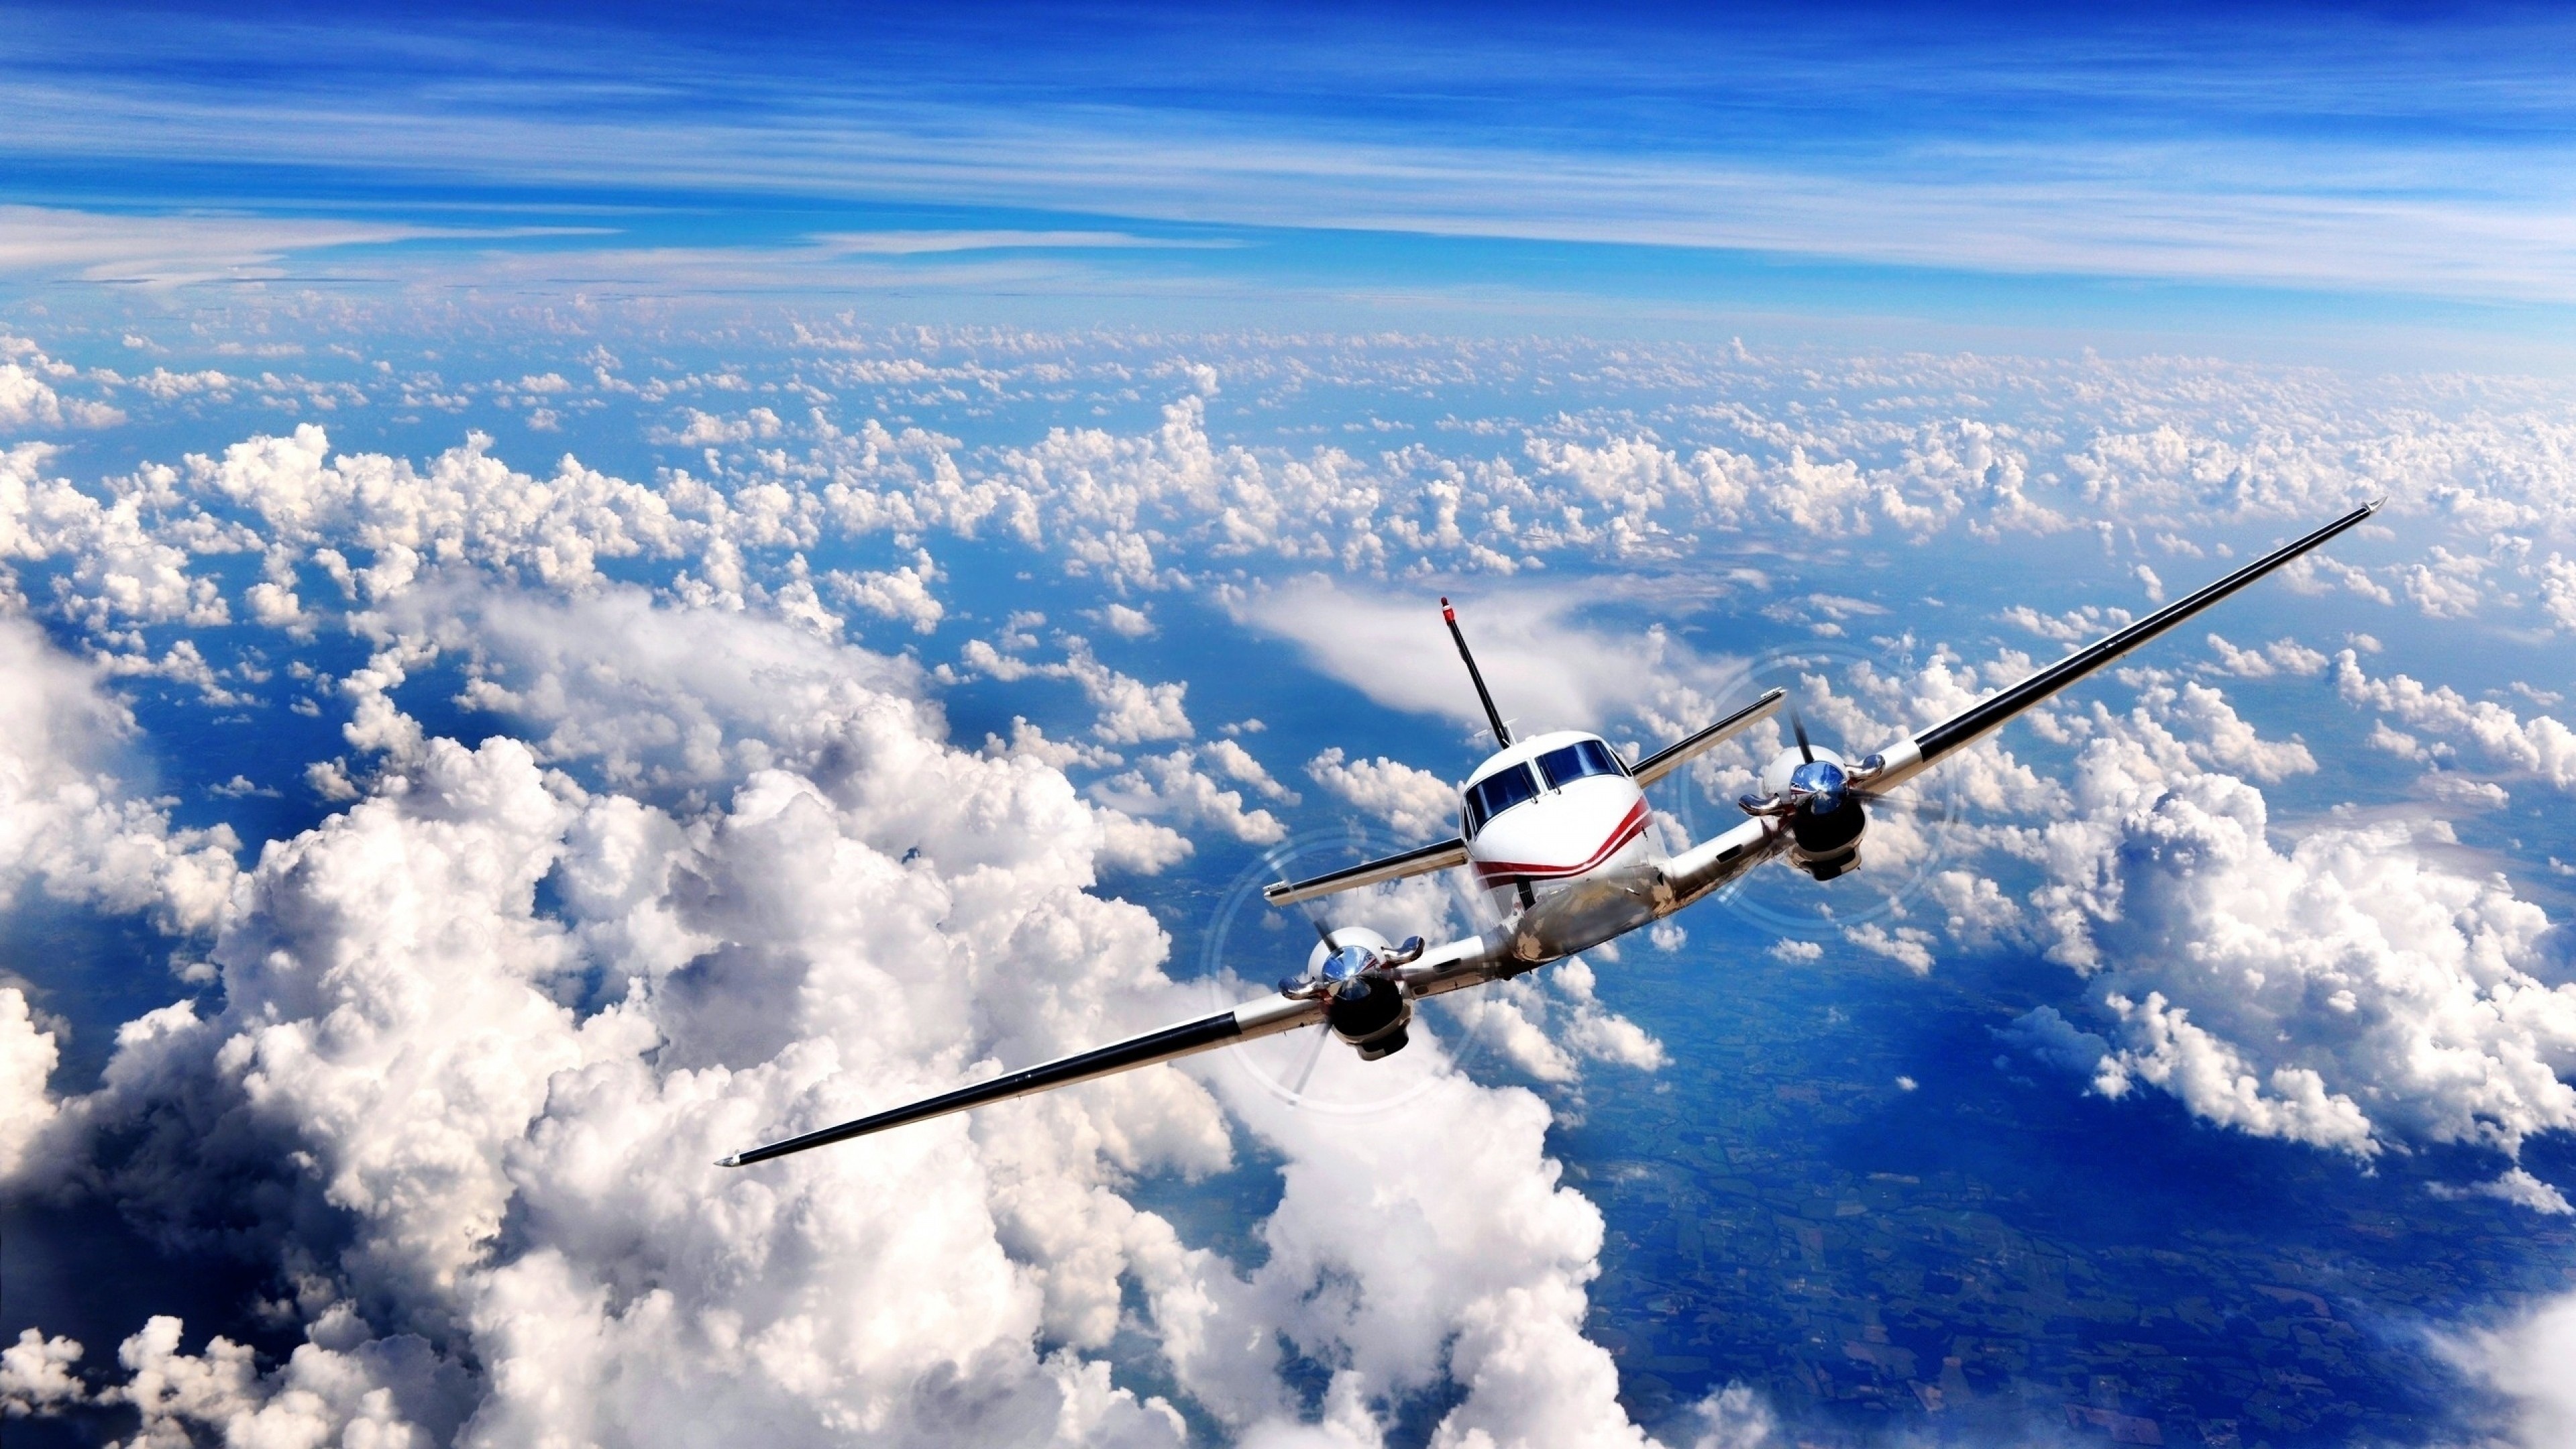 King Air Wallpapers - Top Free King Air Backgrounds 3840x2160